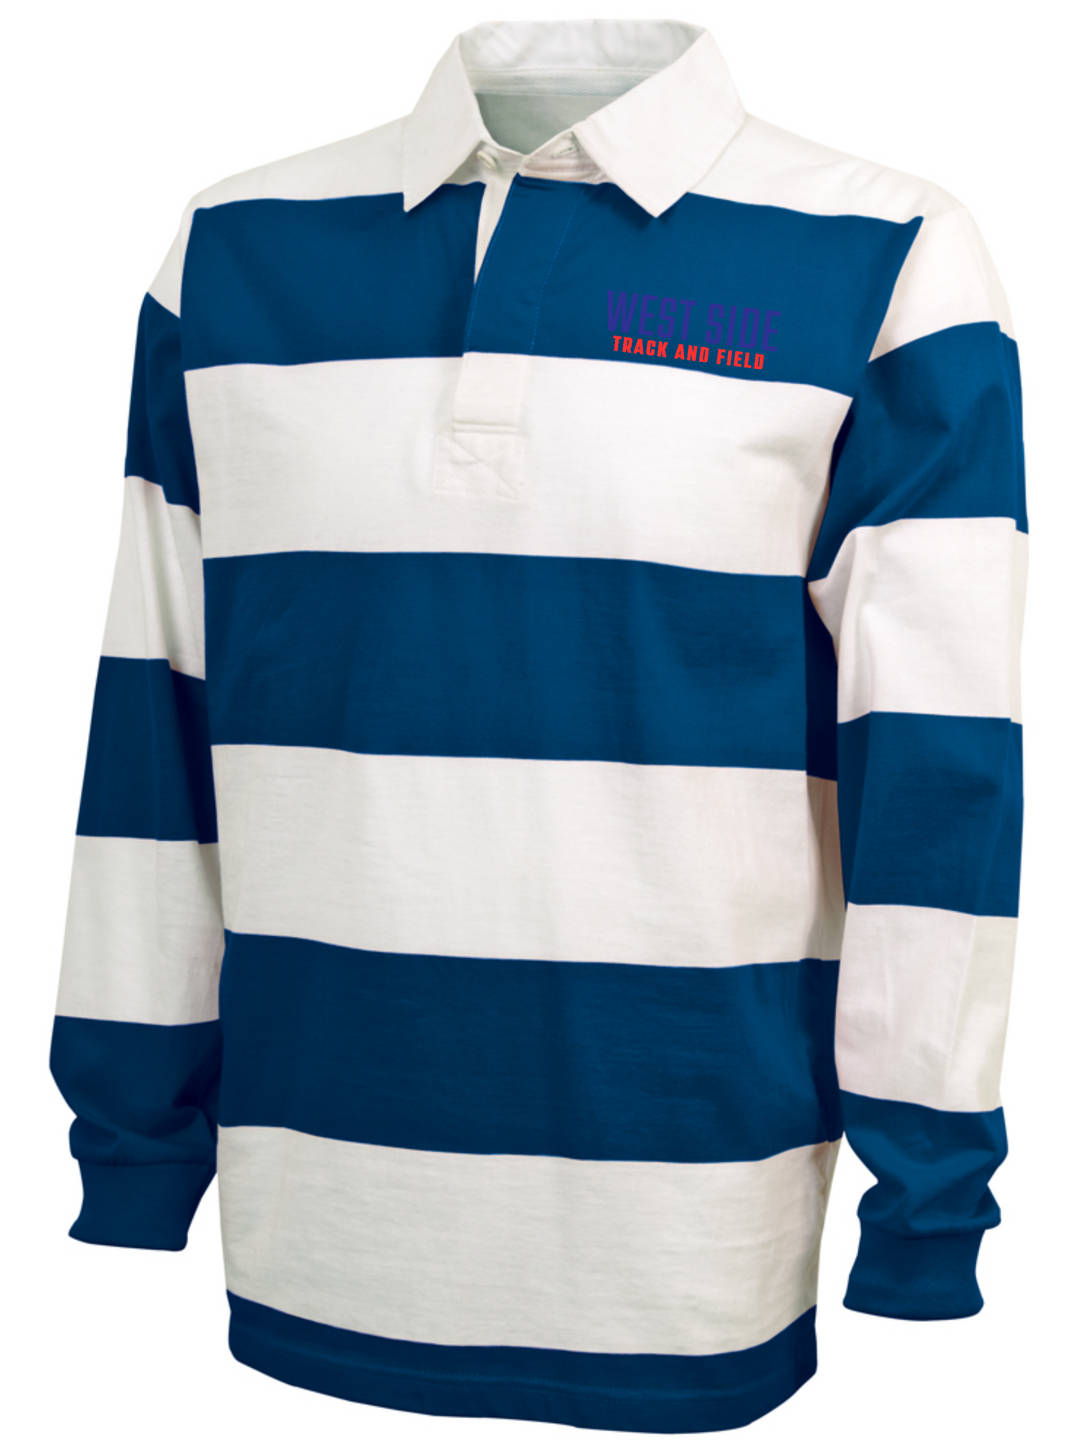 West Springfield Track & Field - Classic Rugby Shirt (9278)